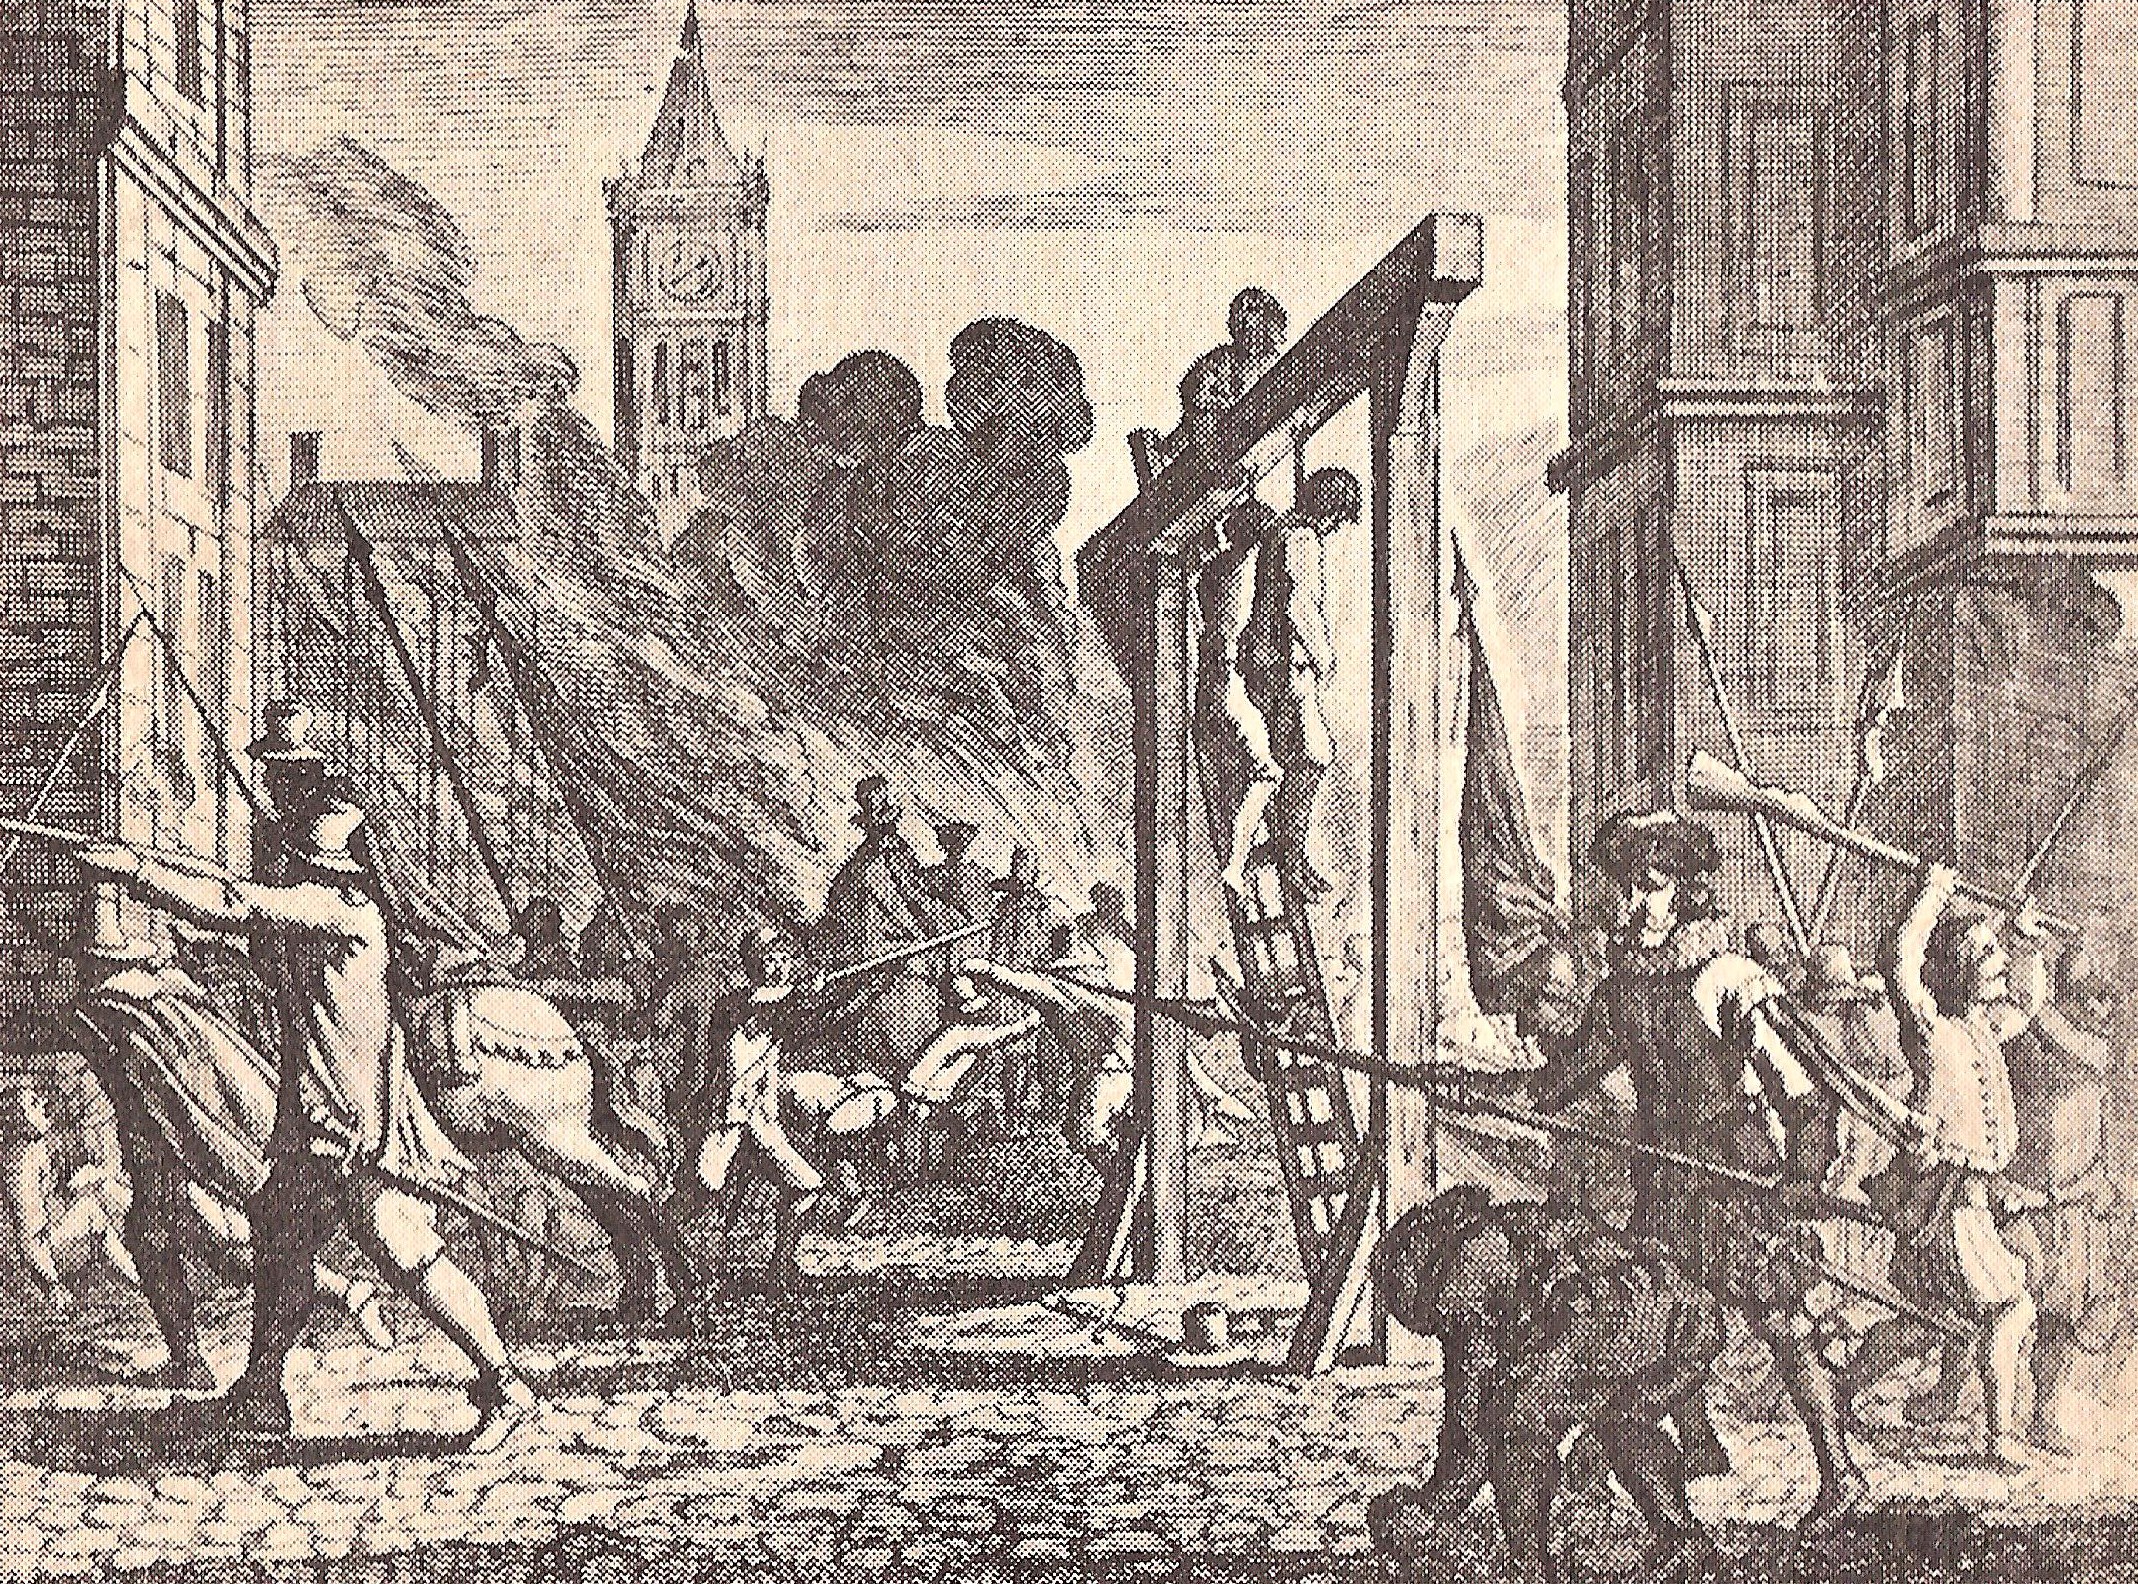 The hanging of Guy de Brès and Peregrin de la Grange on 31st of May, 1567.